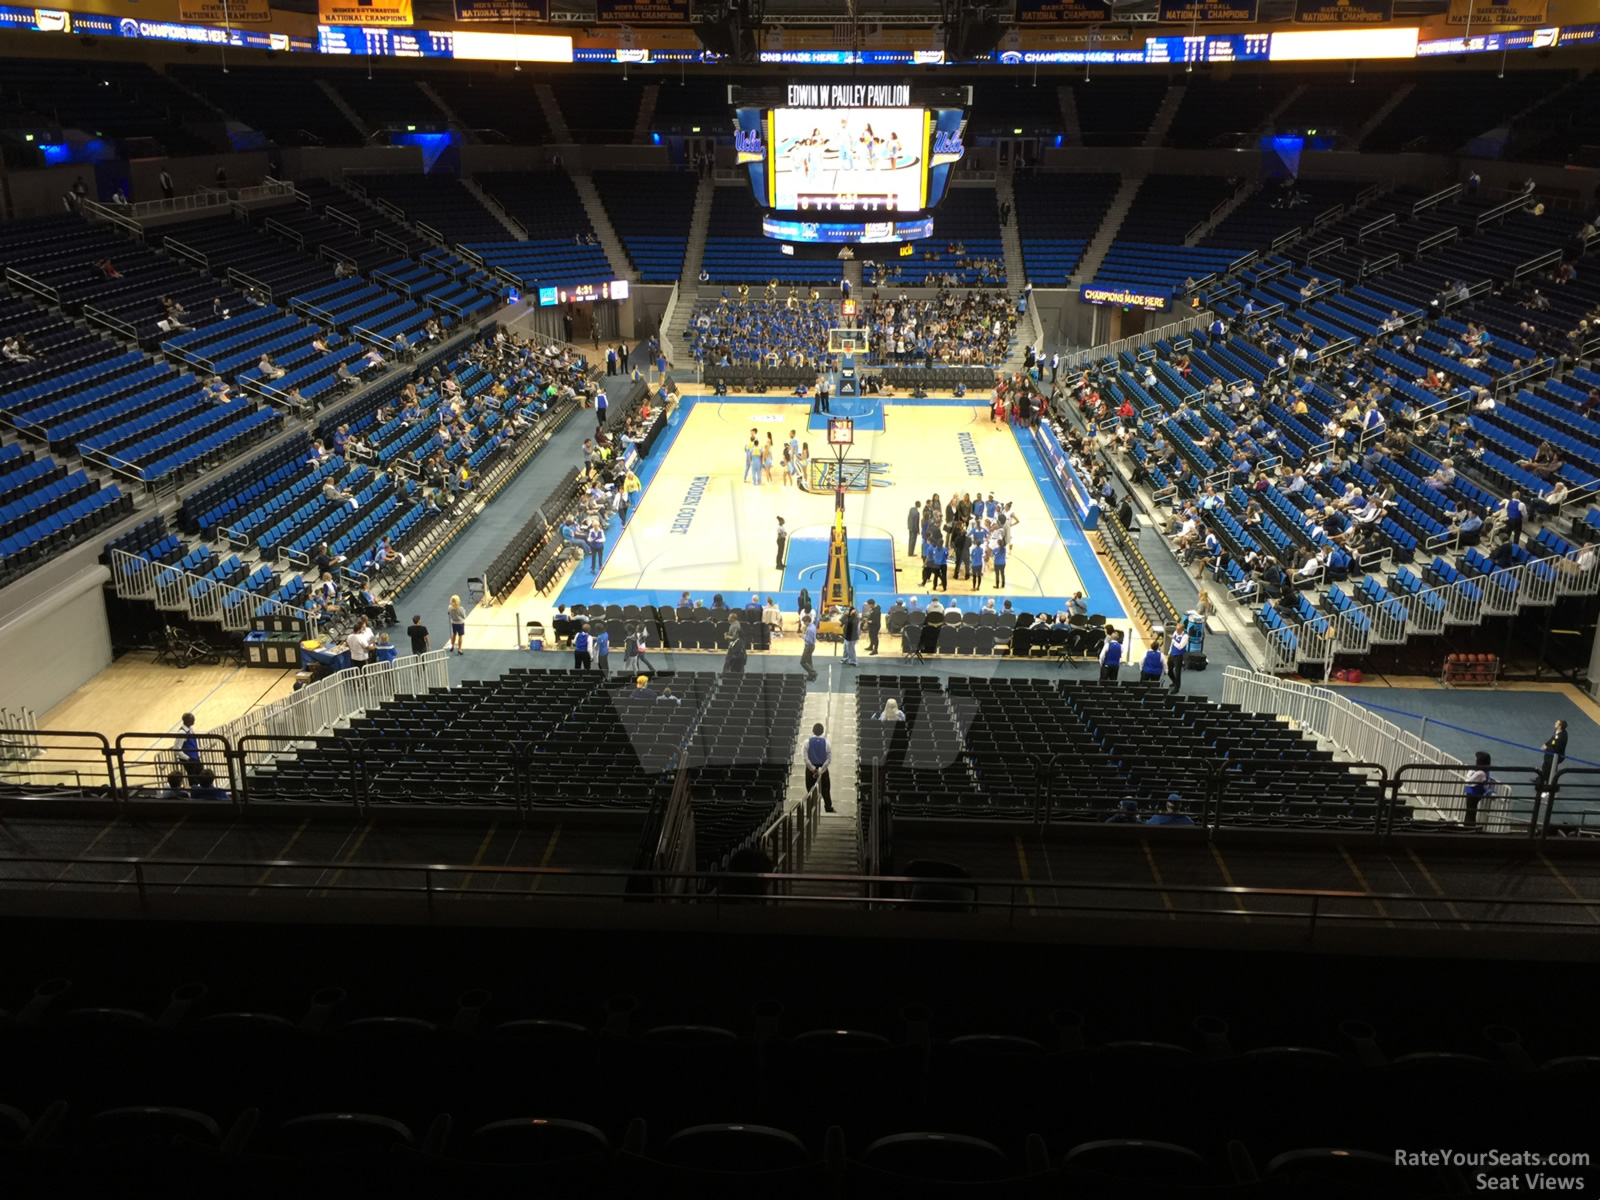 section 209, row 6 seat view  - pauley pavilion